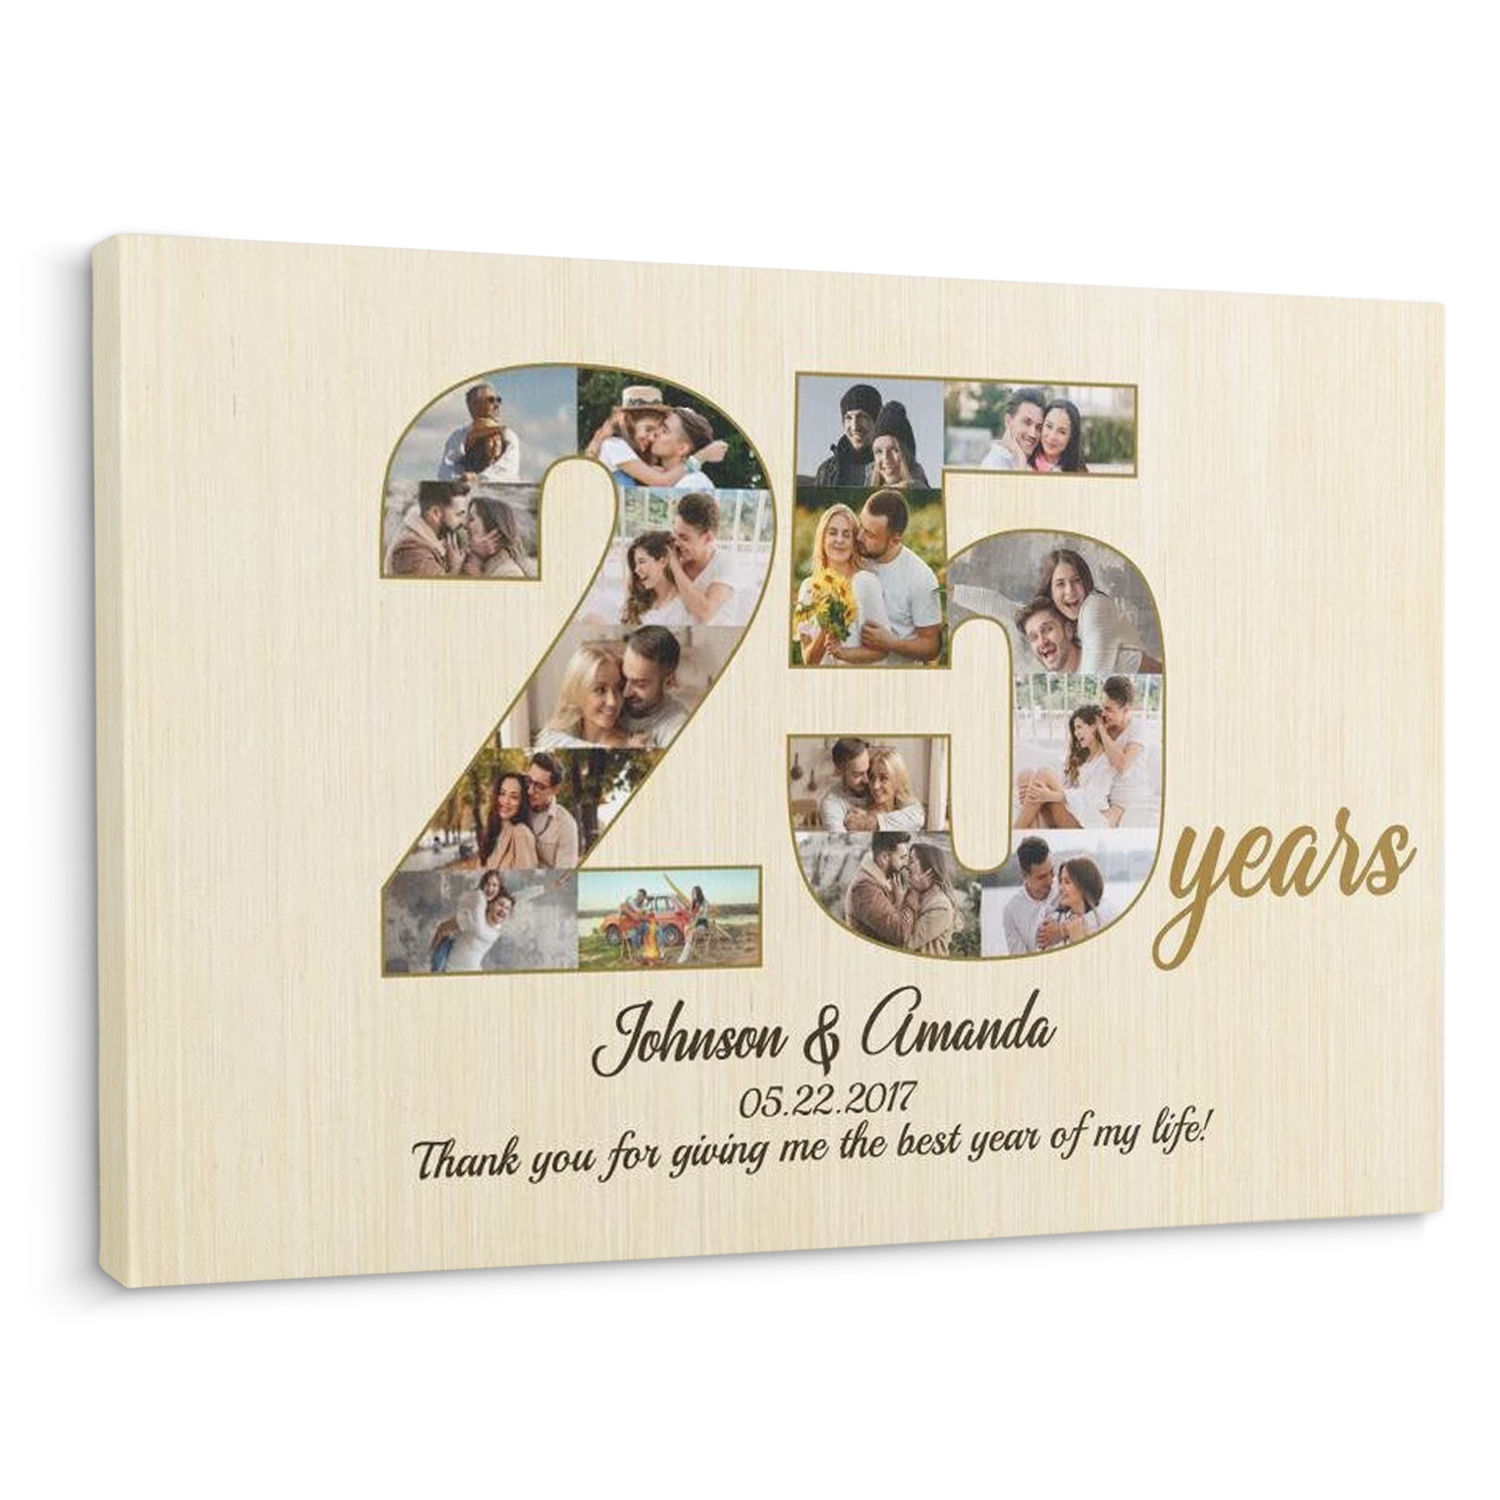 21 Stunning Silver Wedding Anniversary Gifts (25th Year) for Him & Her -  Love & Lavender